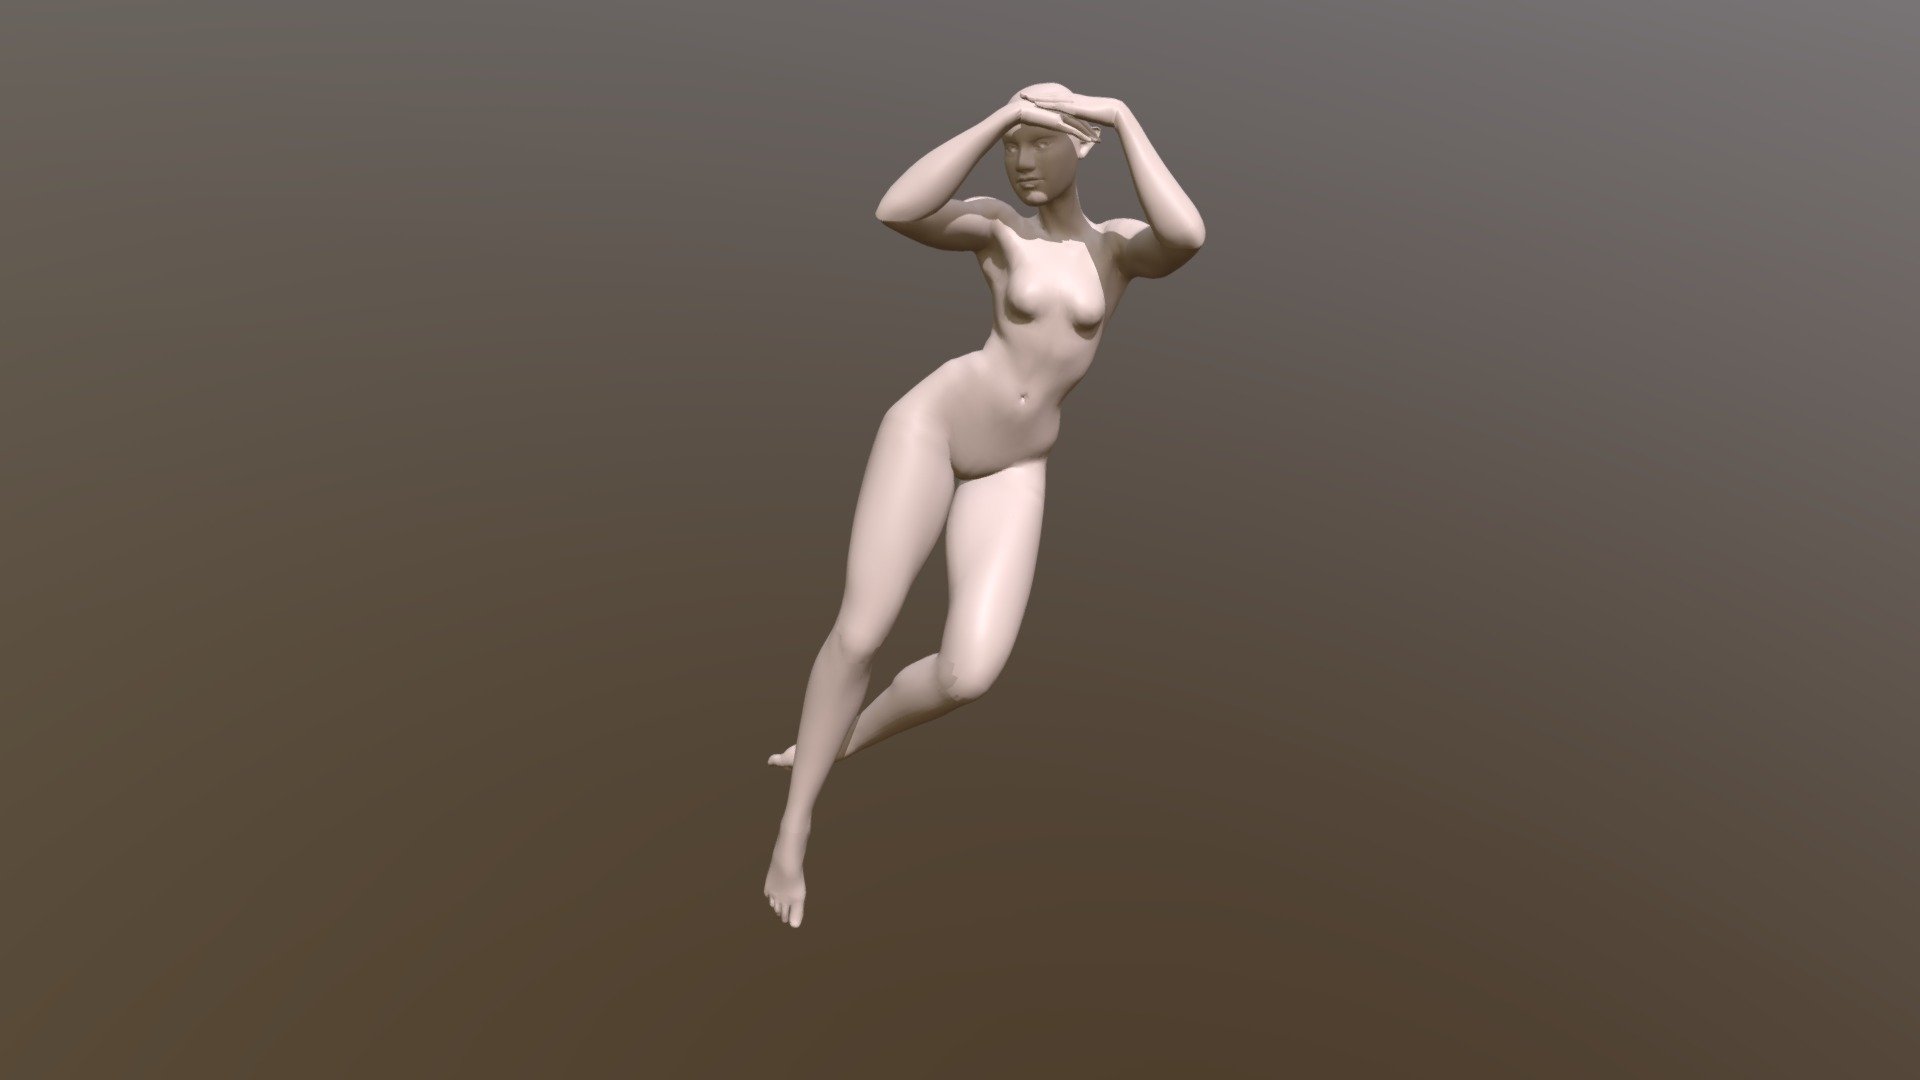 Pose based on artwork by Sevelquae AKA Jade Sivan.
Mesh created by me. I was trying to quickly create a retopologized mesh so I could rig the character using zspheres. This mesh isn't perfect and the wireframe is a little smooshed from sculpting. In hindsight, having so many 3 pointed star/kite areas is not great for sculpting, and creates pinching when subdivision levels are added 3d model